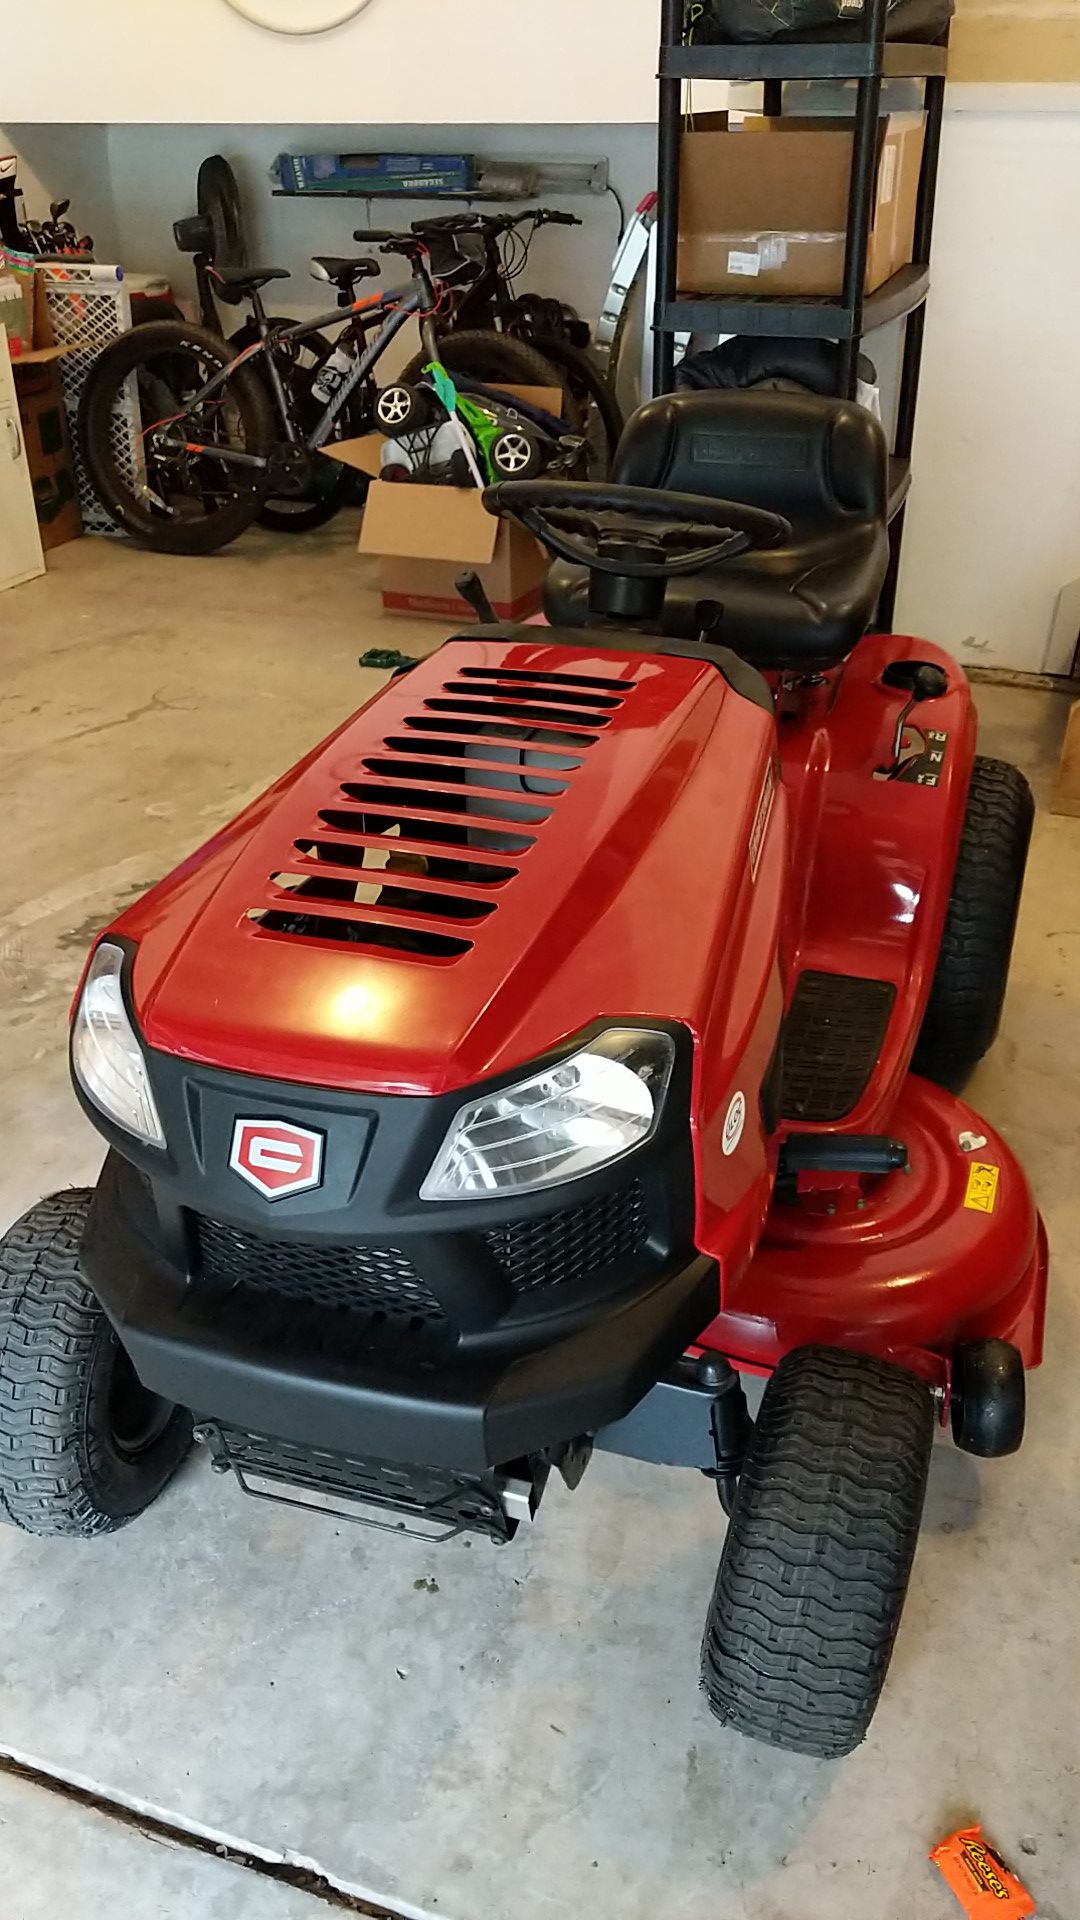 Riding lawnmower Craftsman T1400, comes with dumping trailer. It's new, 35 percent off any store or online.